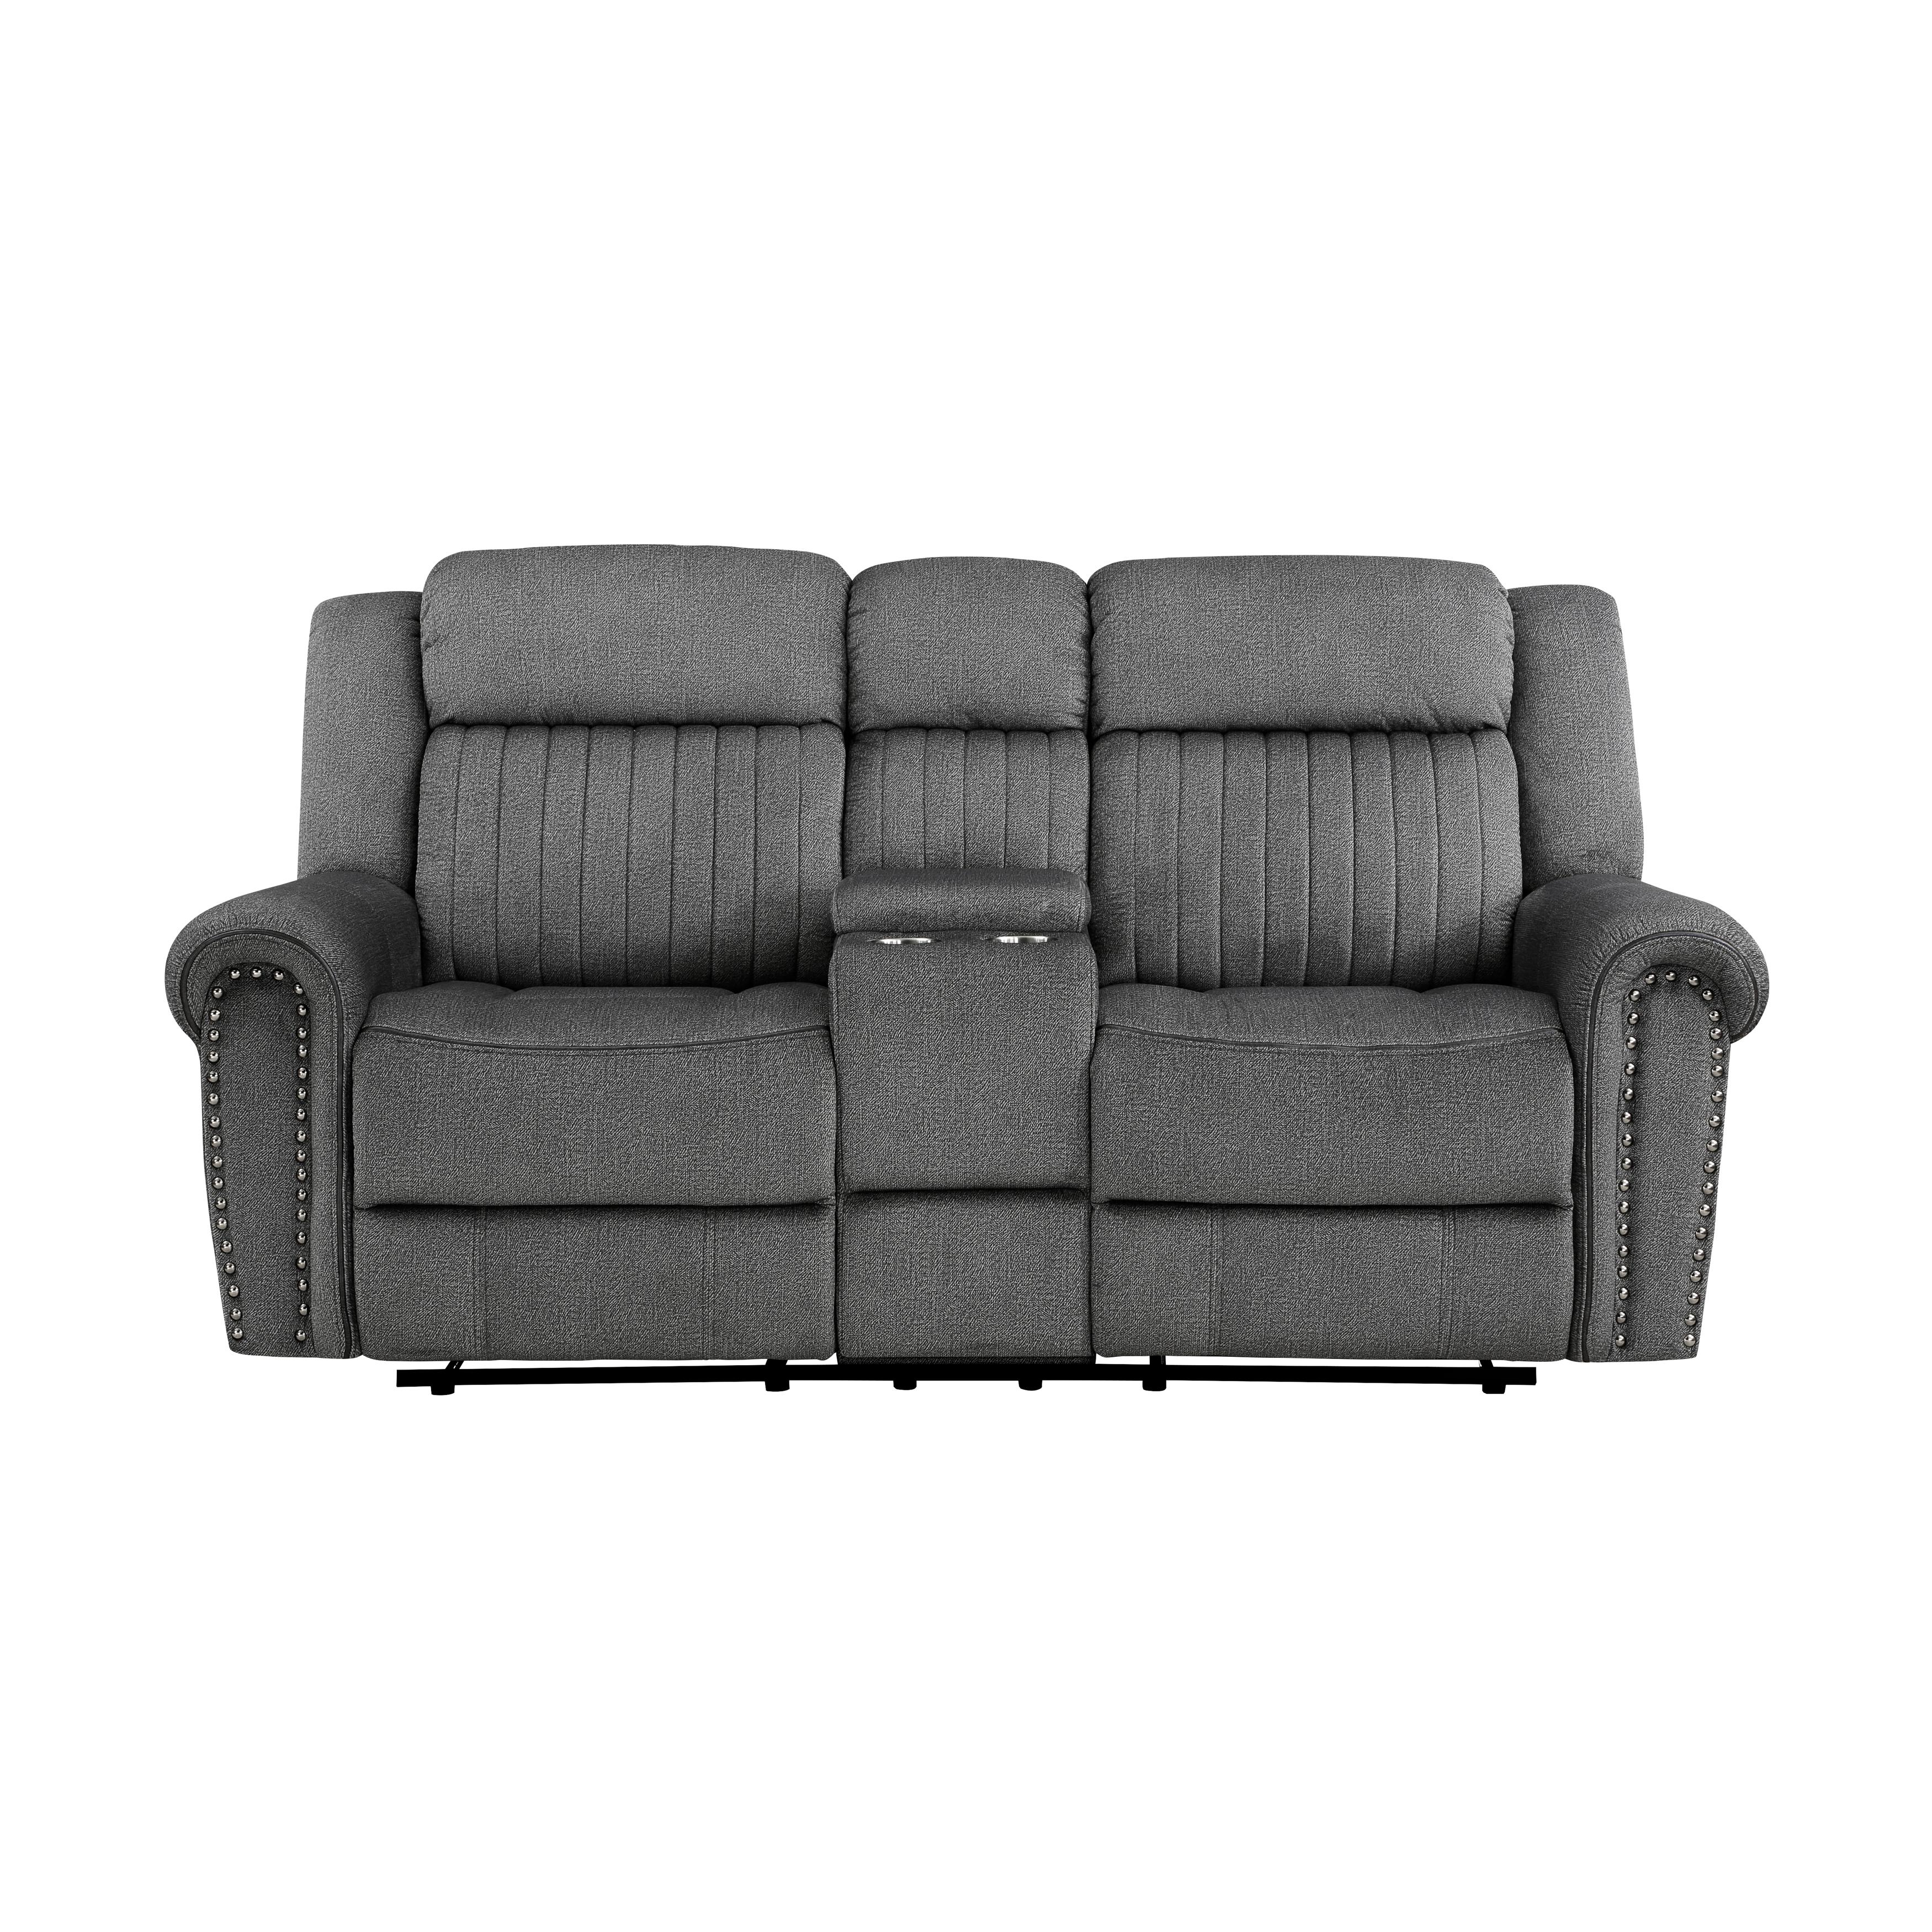 Transitional Reclining Loveseat 9204CC-2 Brennen 9204CC-2 in Charcoal Microfiber